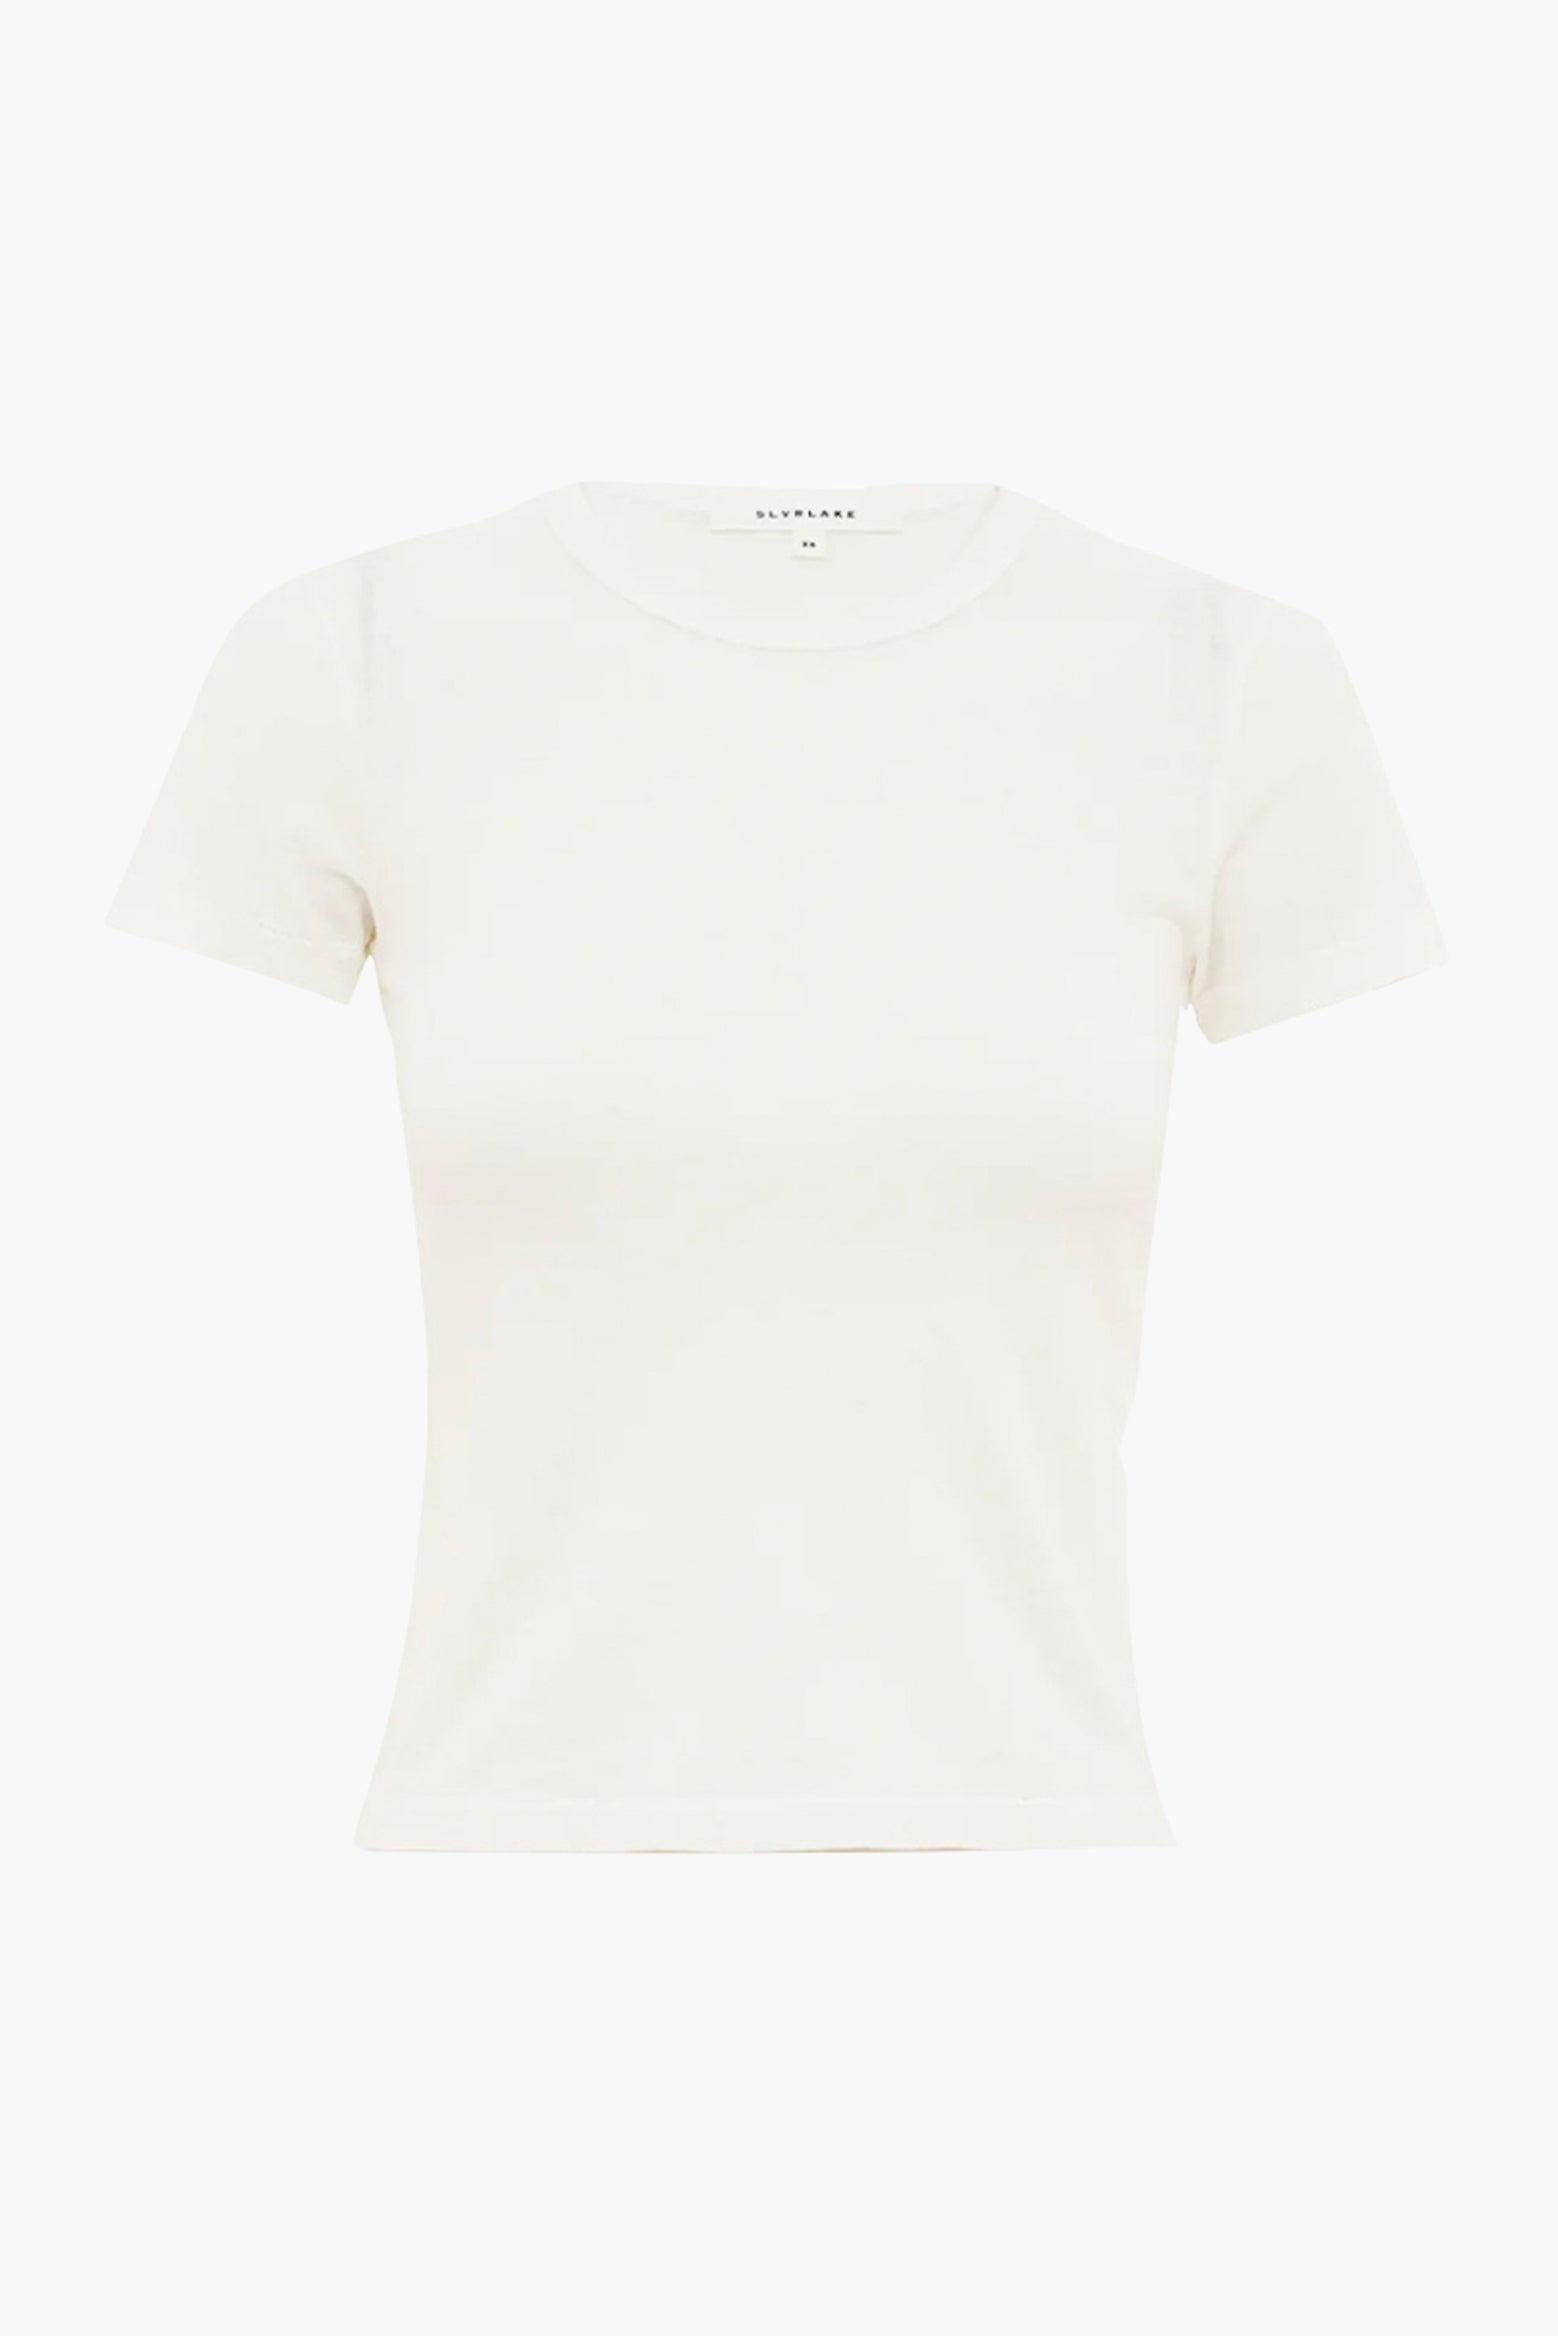 SLVRLAKE Baby Tee in Natural White available at The New Trend Australia.